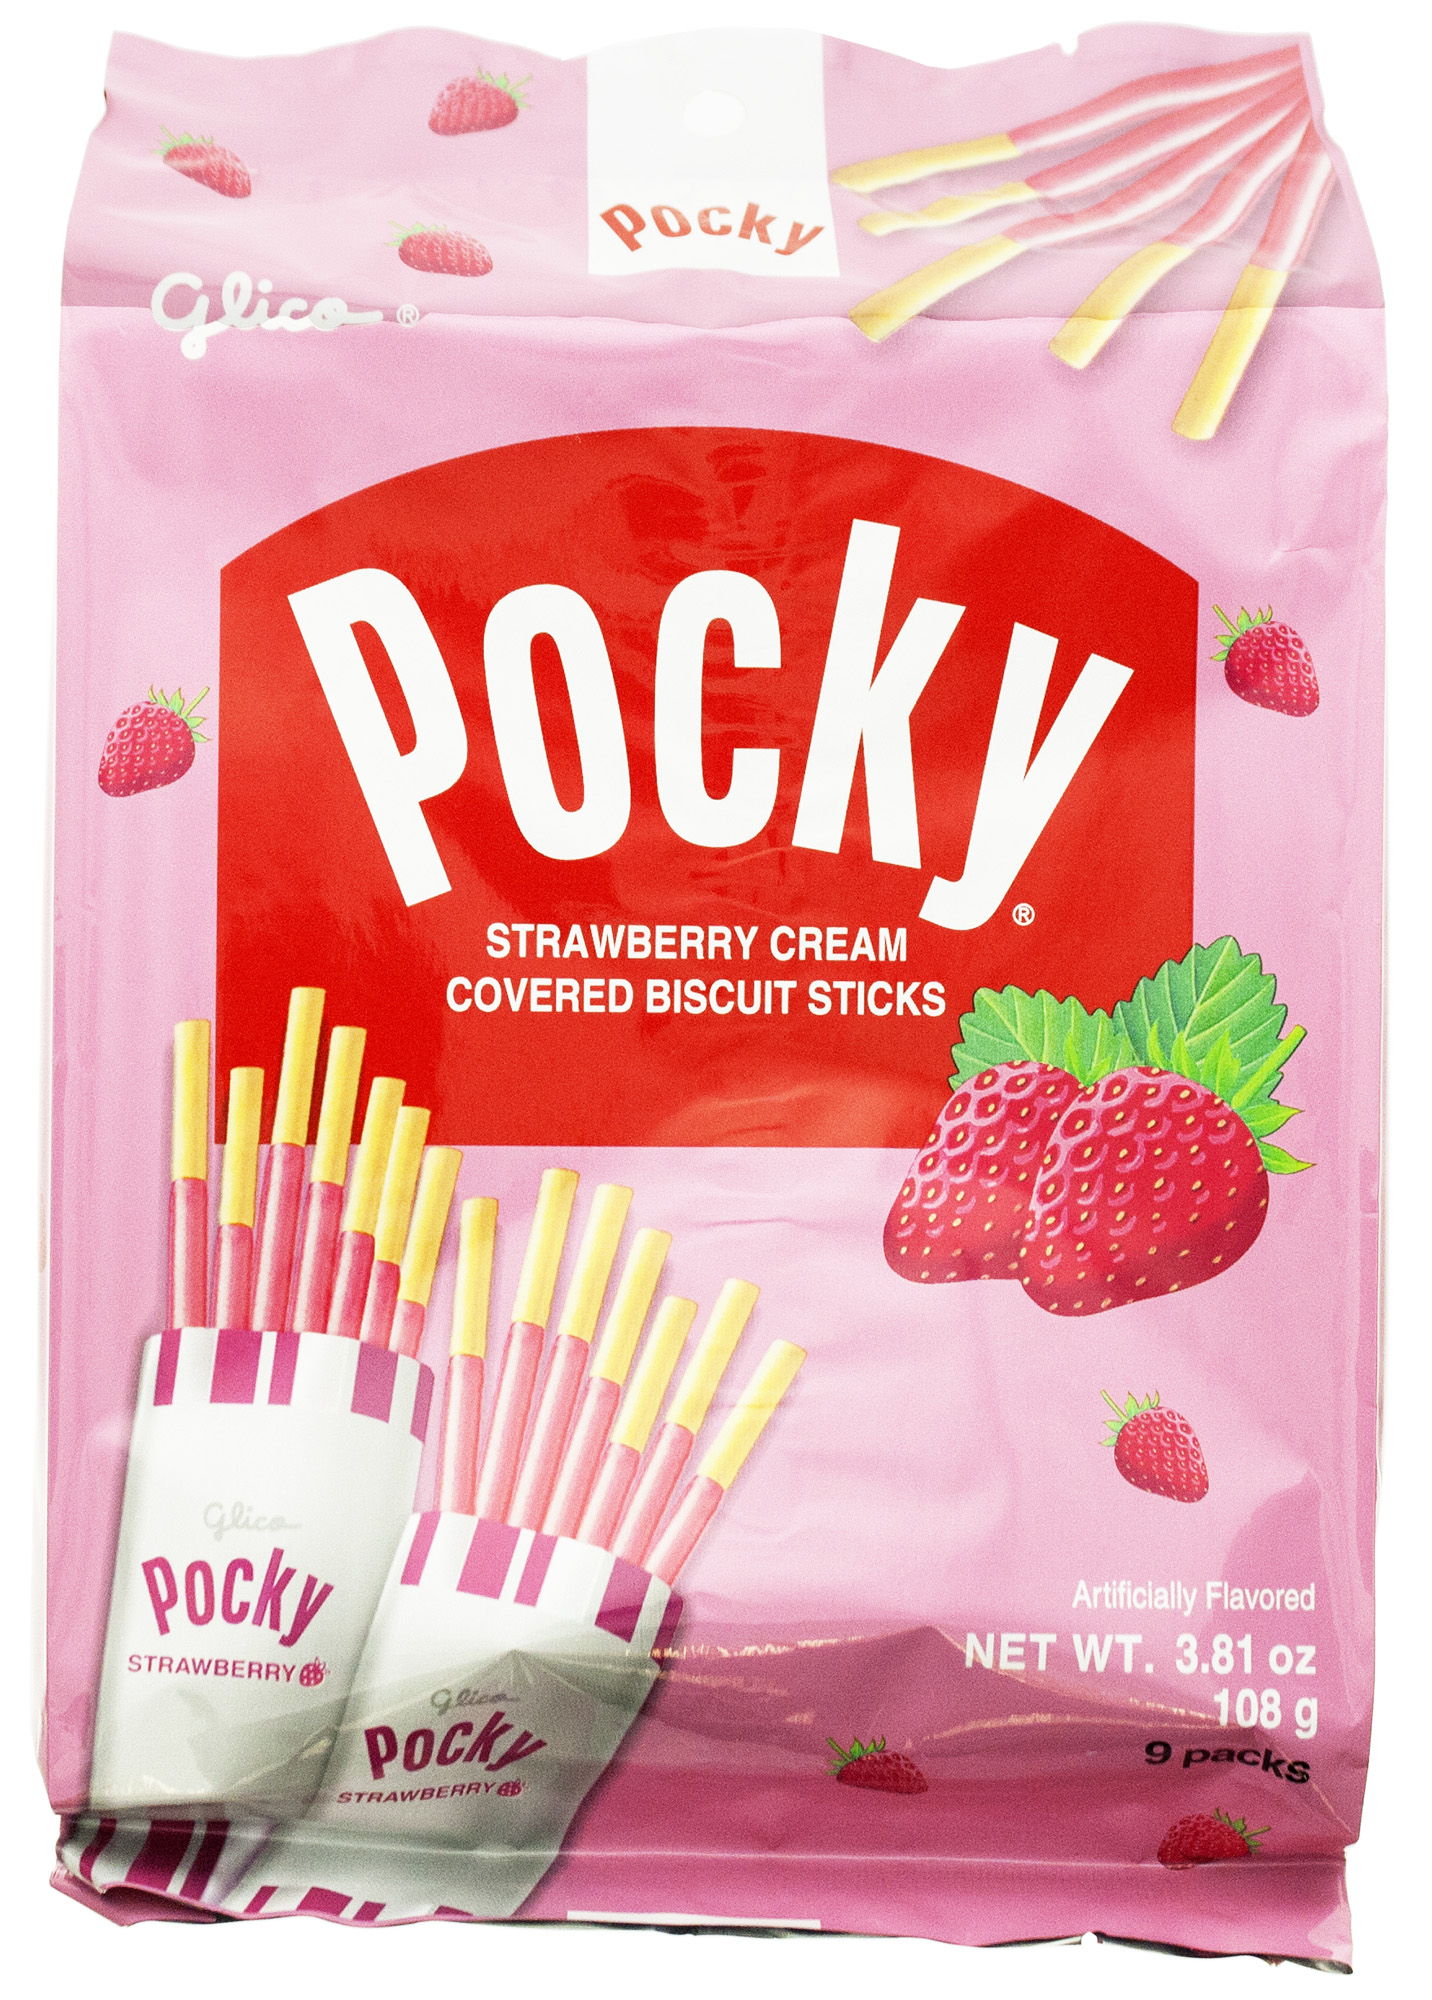 3.81 oz Glico Pocky 9 Individual Bags Strawberry Cream Covered Biscuit Sticks